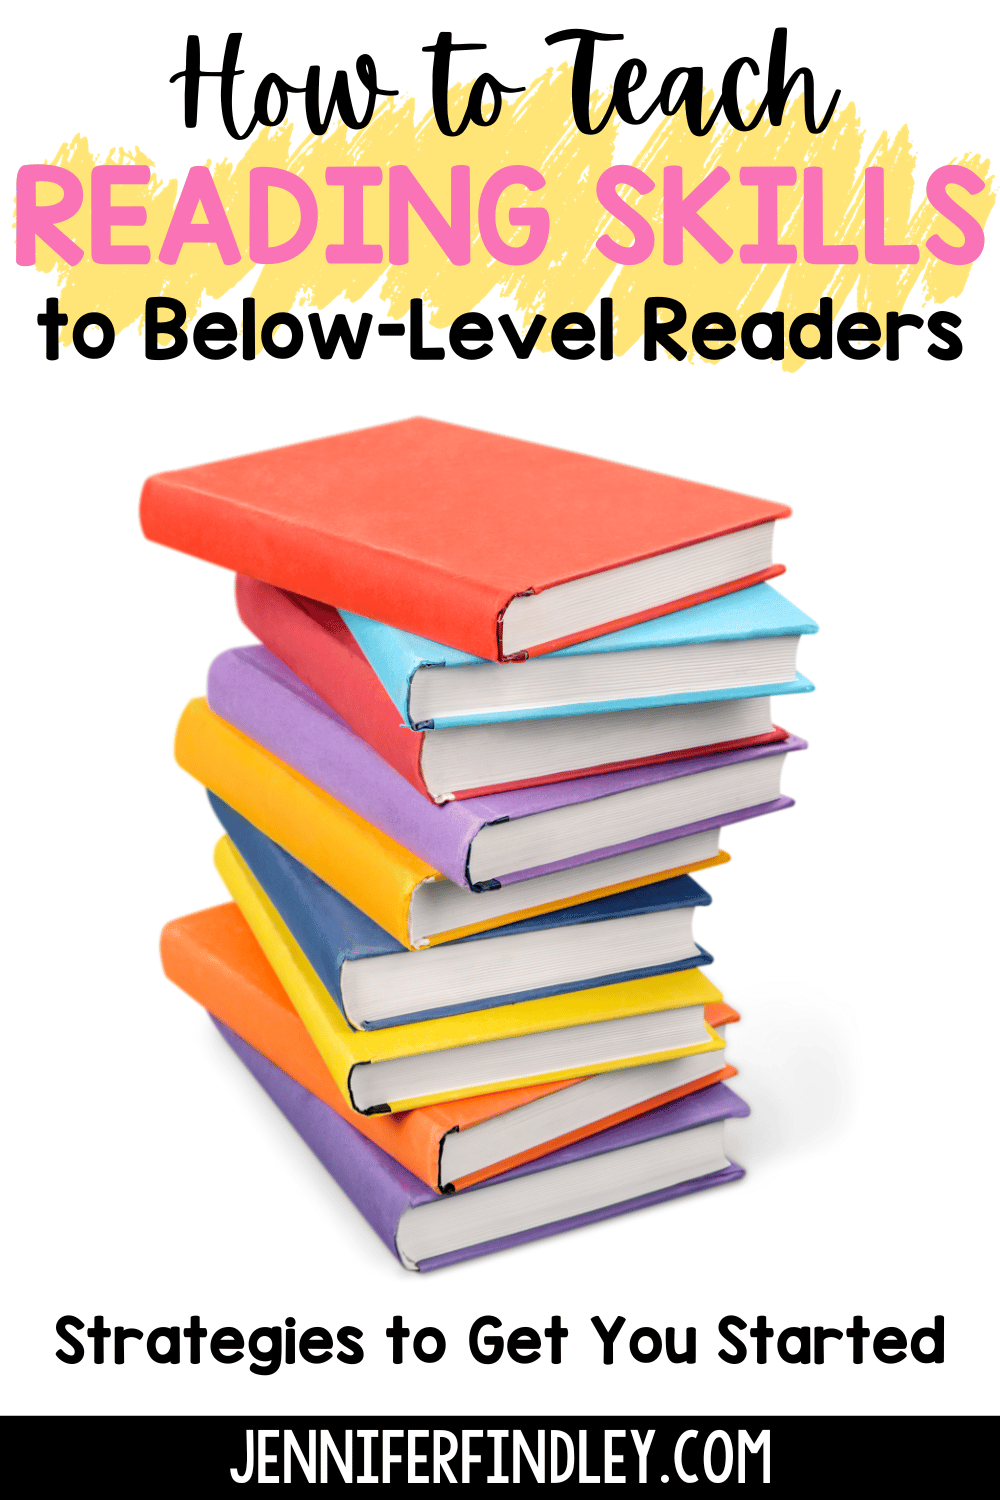 Excerpt: Tackling the challenge of teaching 4th and 5th graders who read below grade level? This blog post offers effective strategies to boost their reading skills while keeping them engaged with grade-level content.